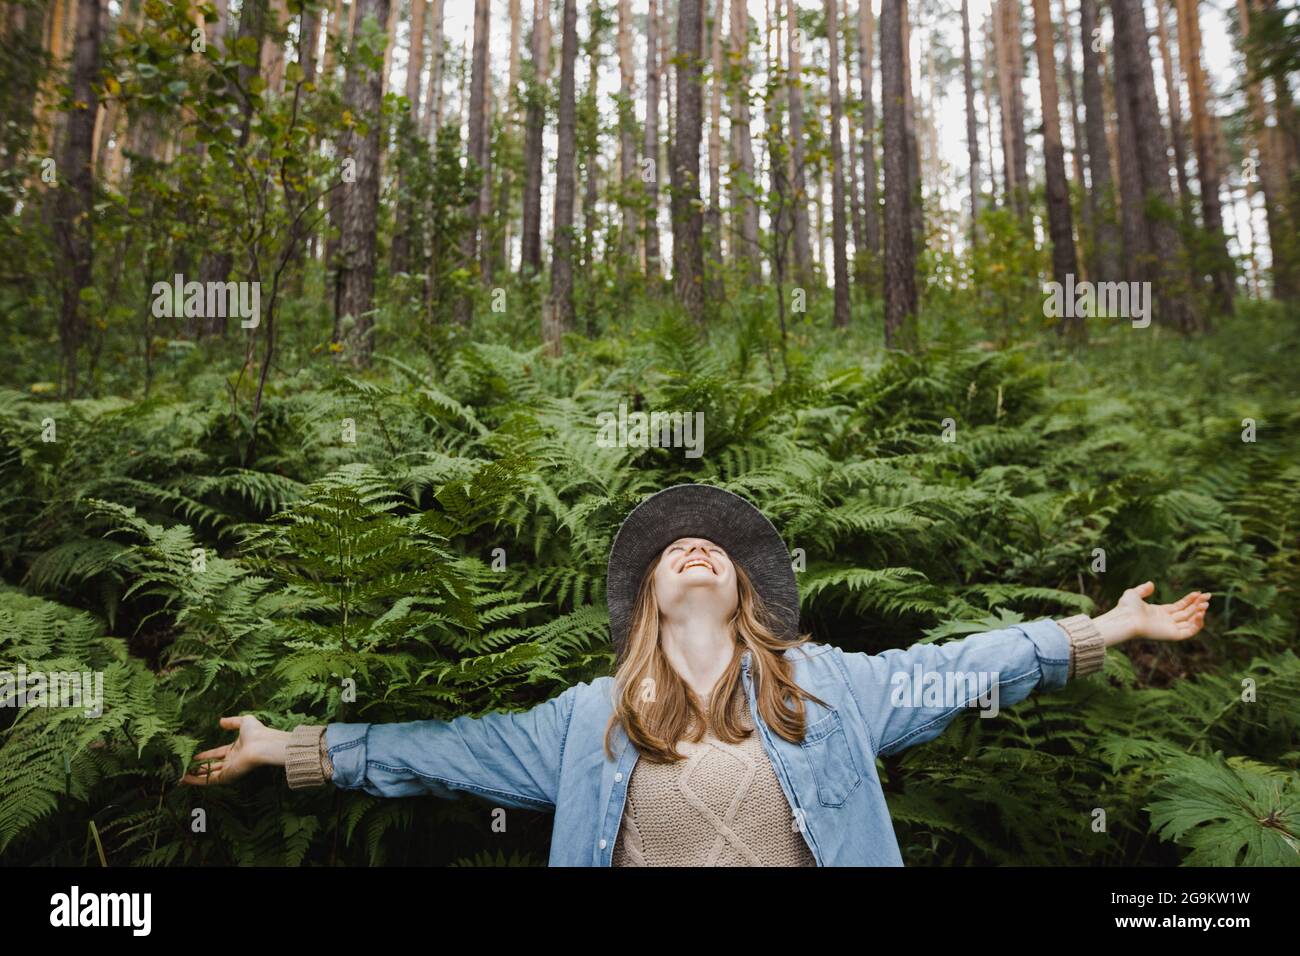 Positive female with outstretched hands in abundant fern growing in woods with tall pines Stock Photo